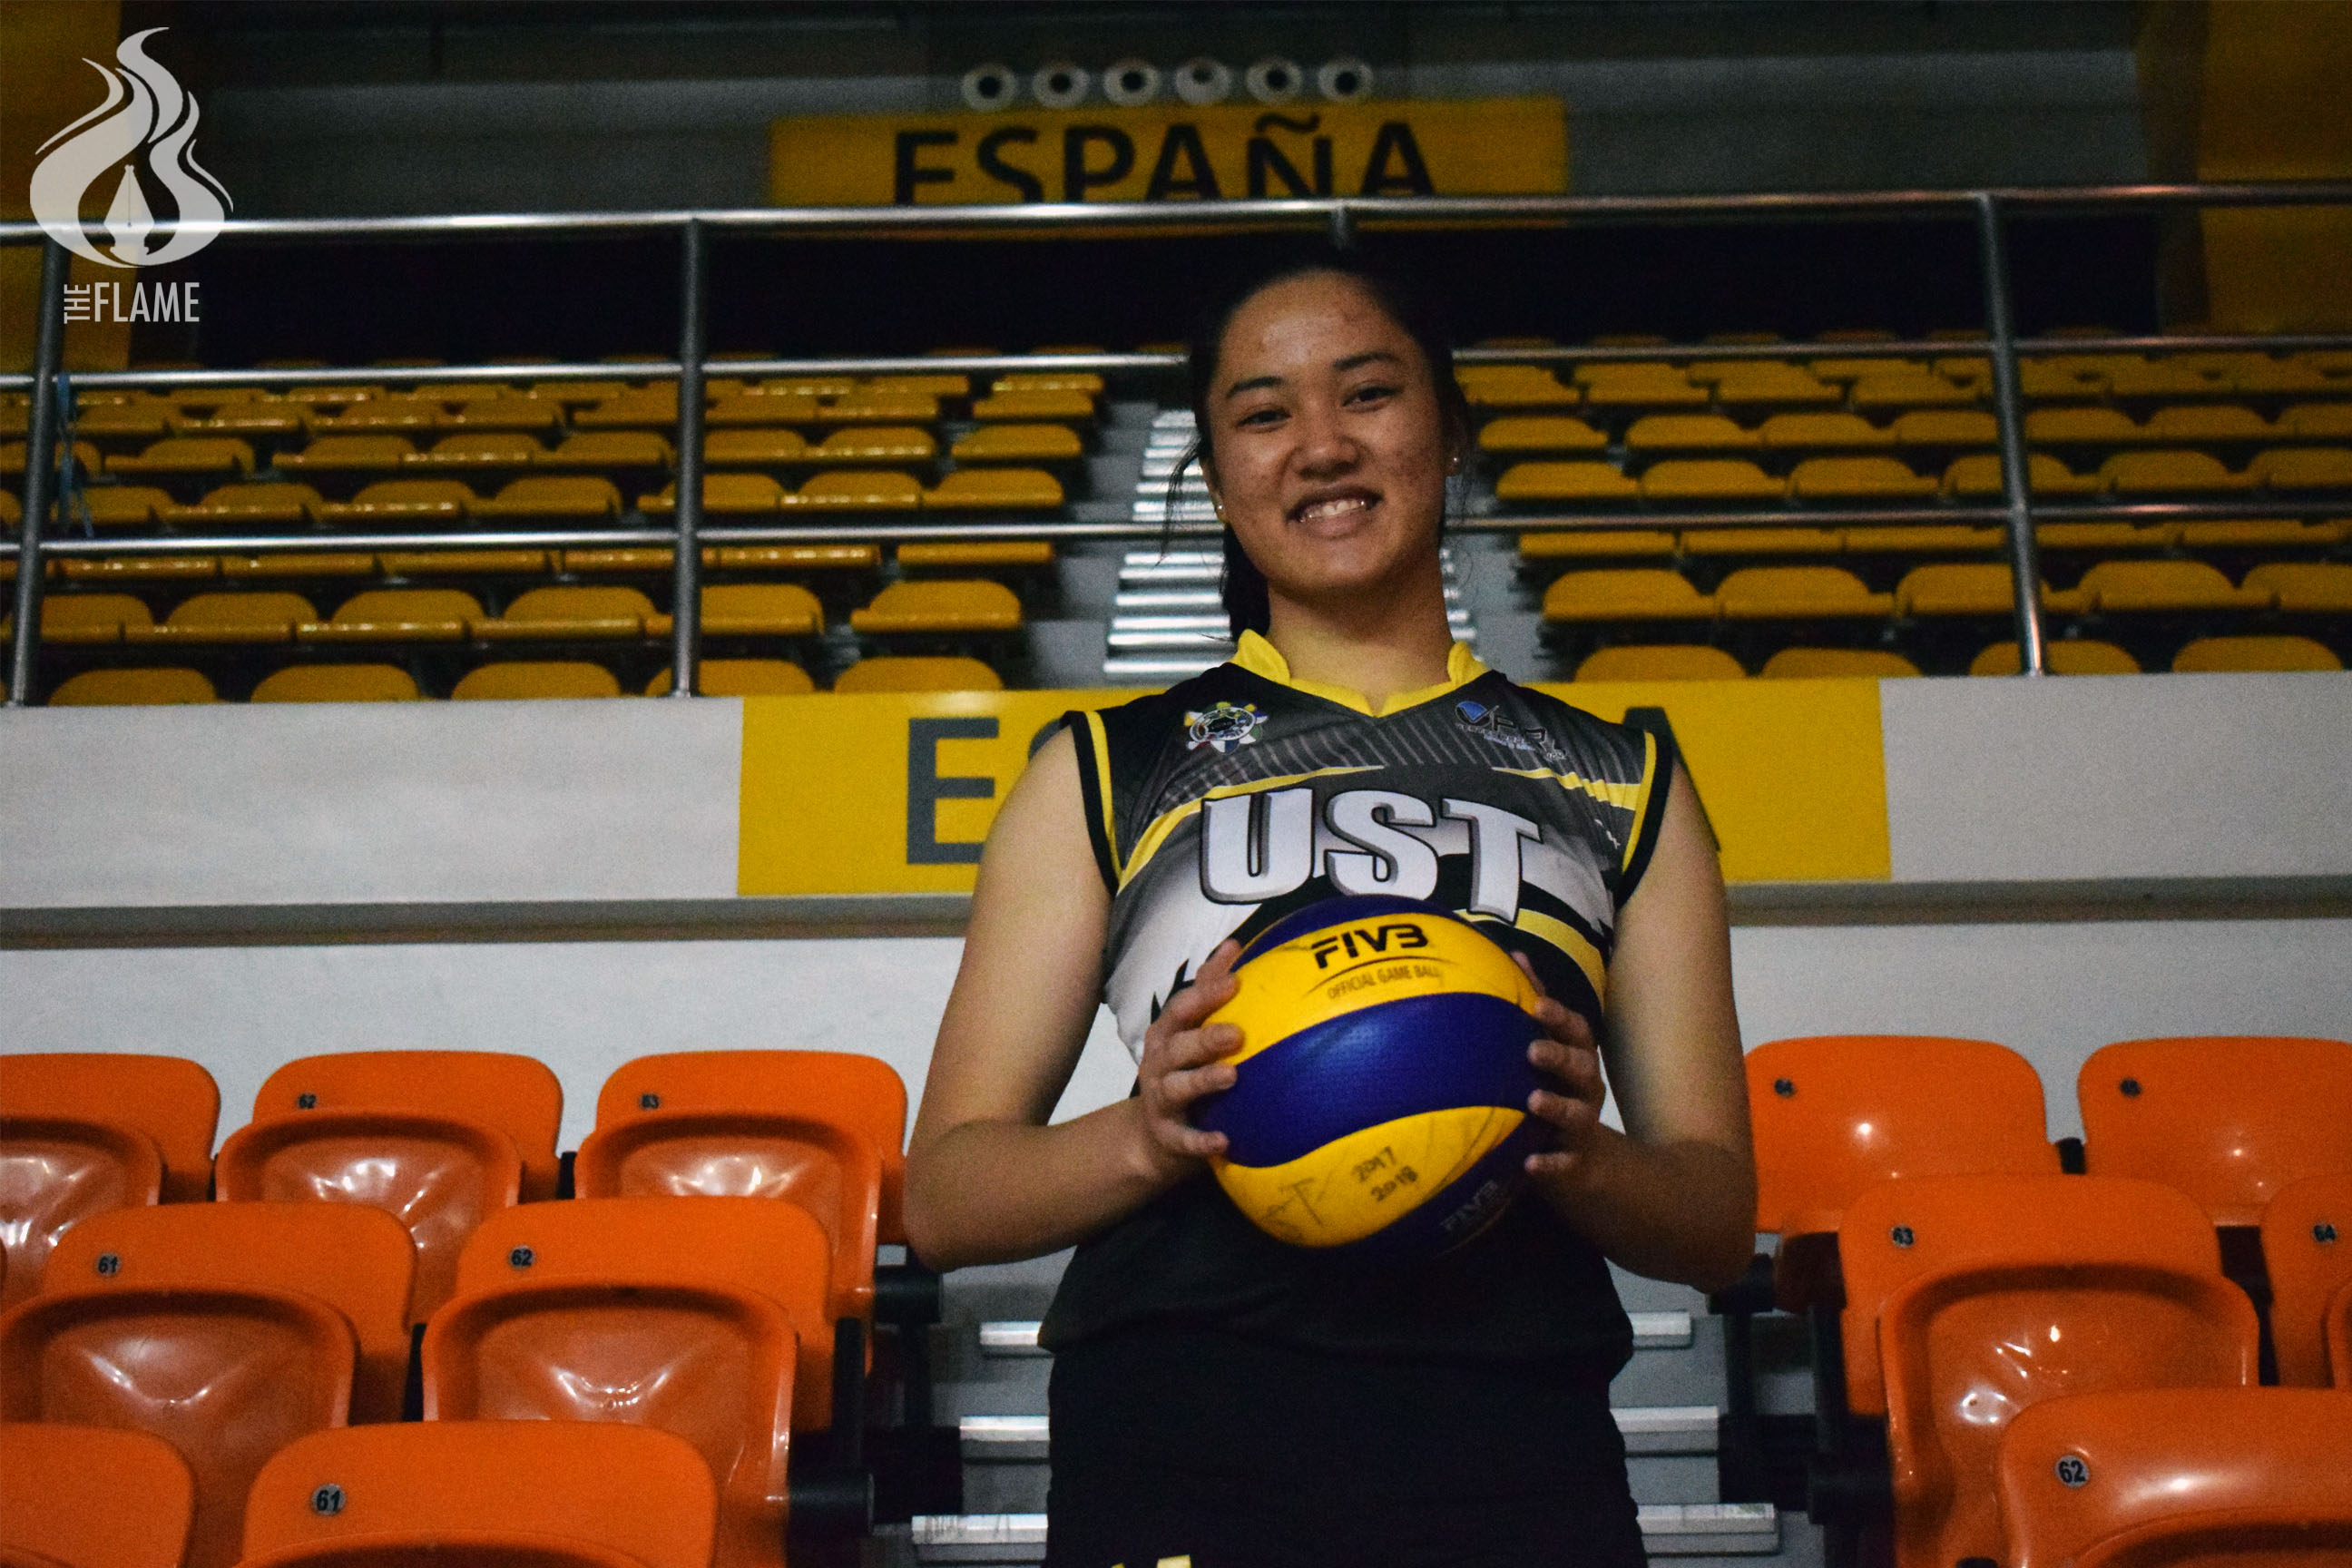 Christine Francisco brings passion to the court